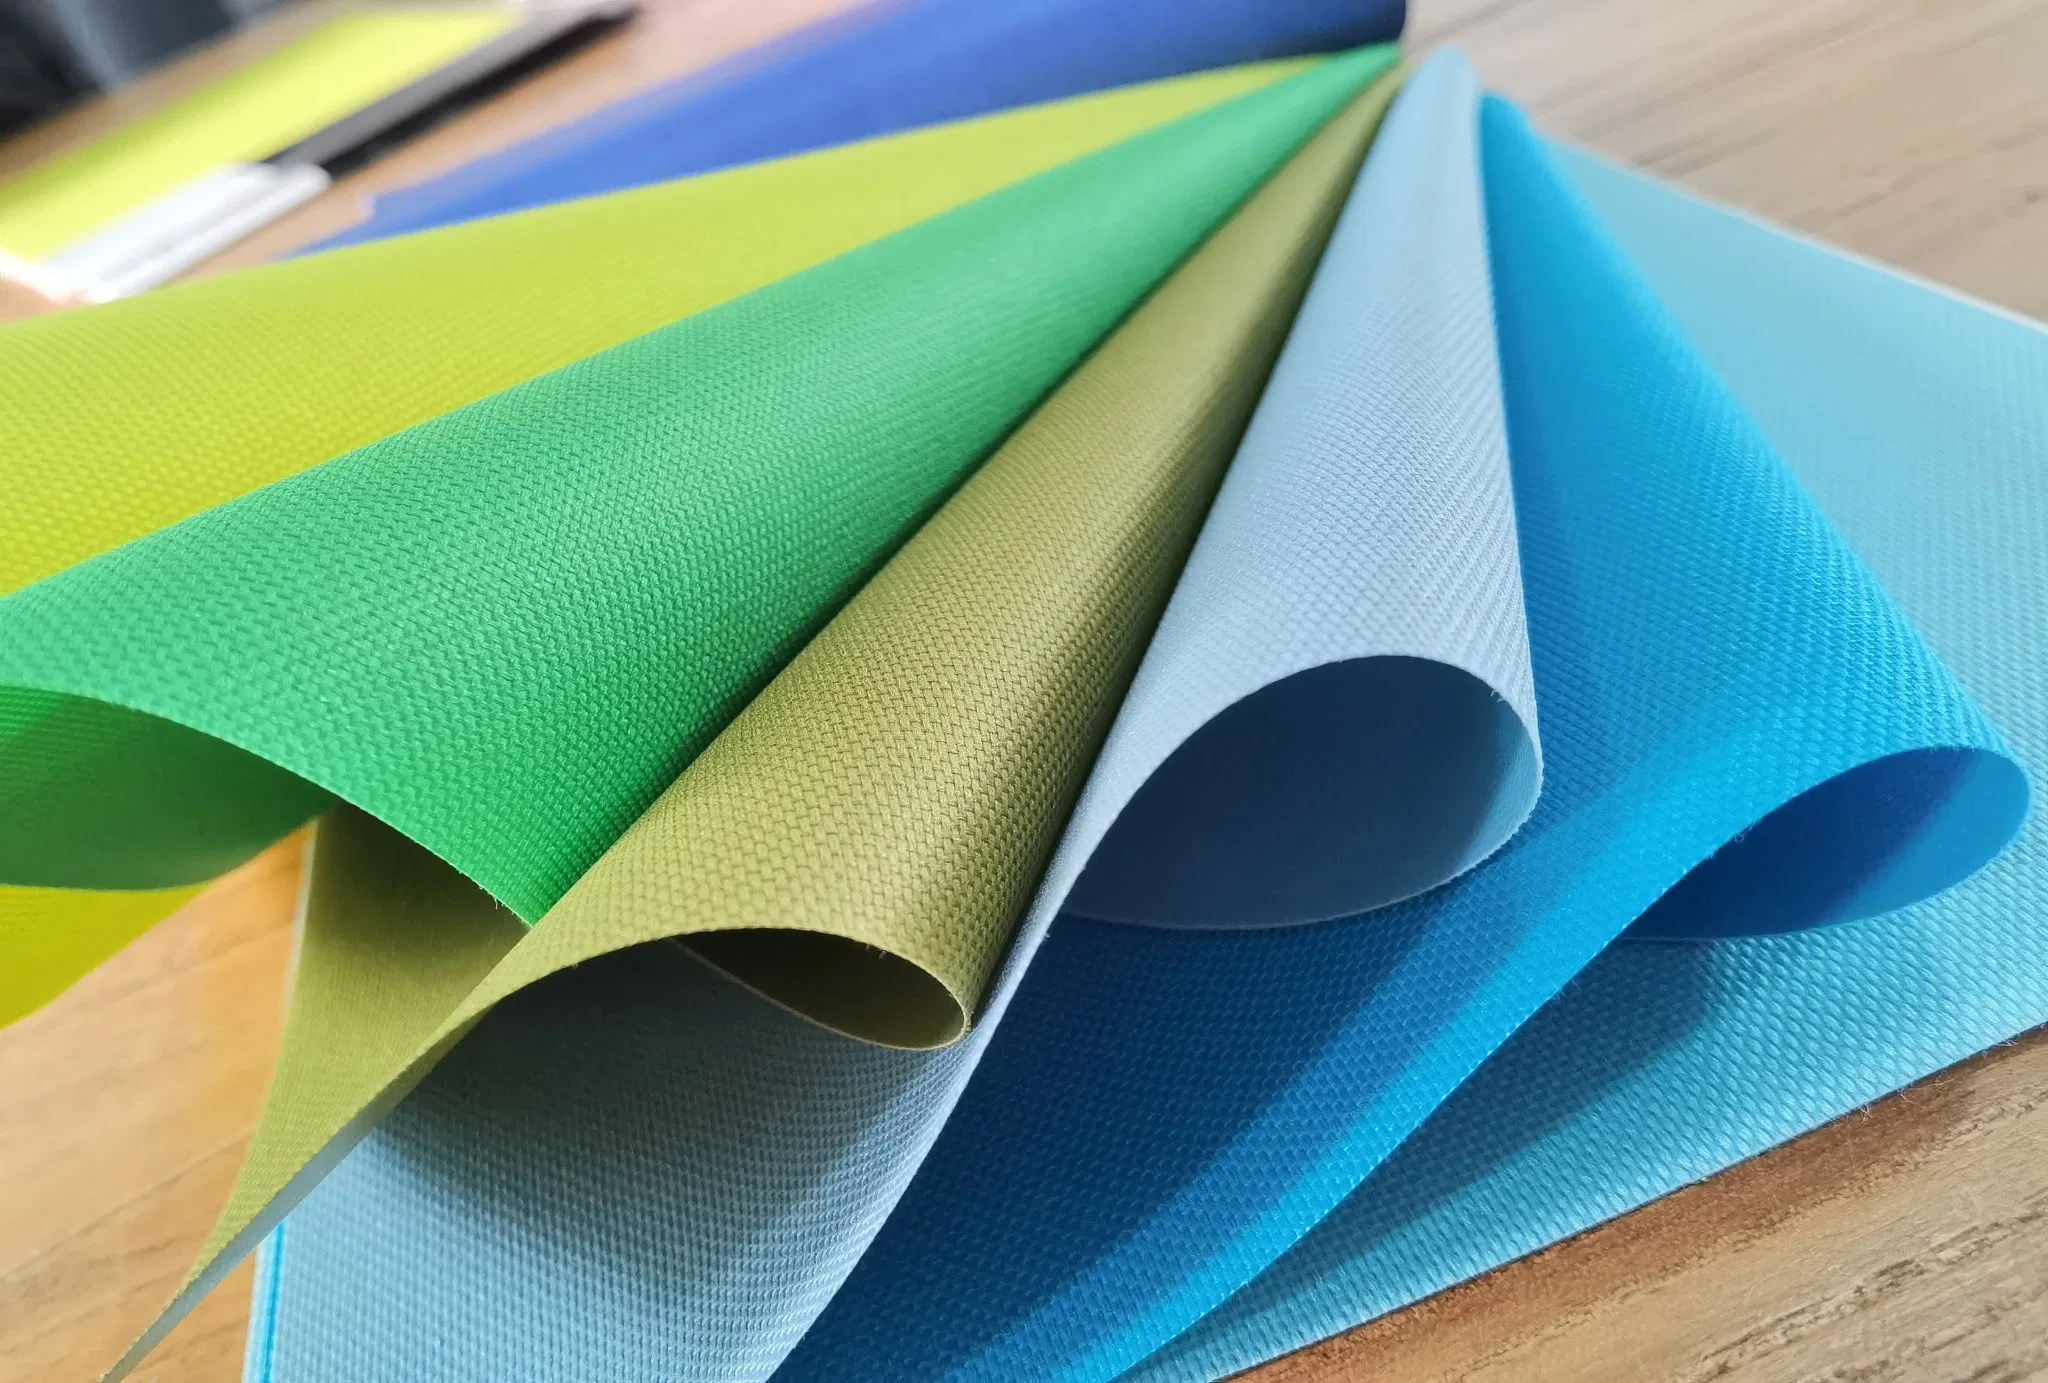 Waterproof Nylon Fabric PVC Coated for Bags